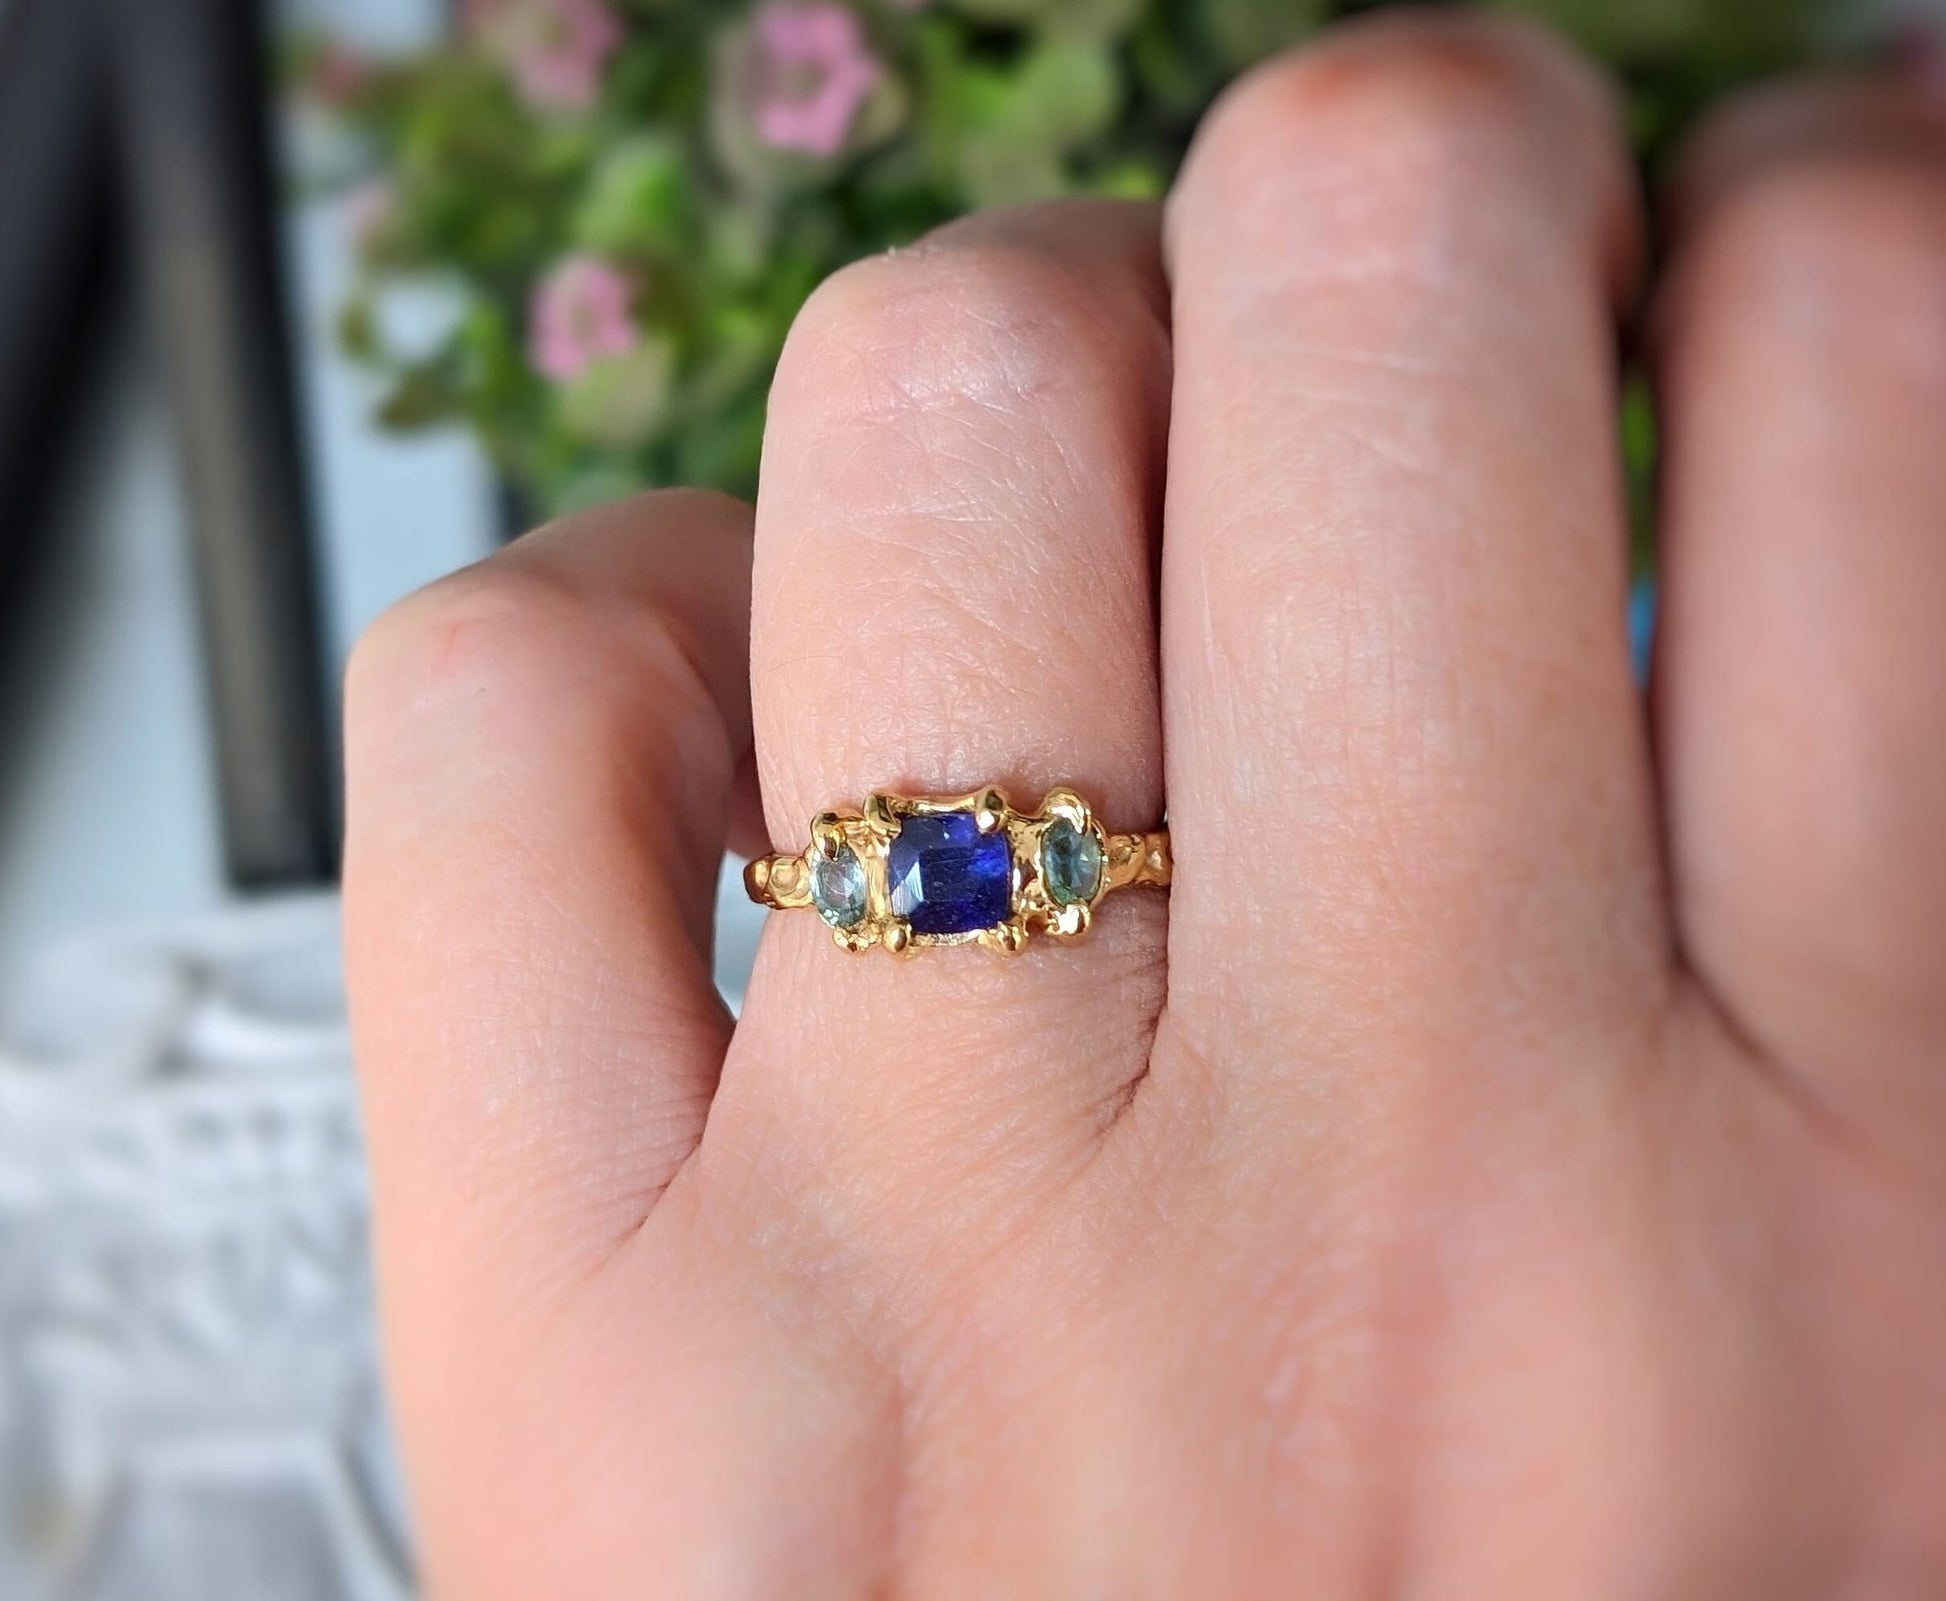 Woman's hand wearing a Blue Sapphire and Tourmaline ring in textured molten Gold setting